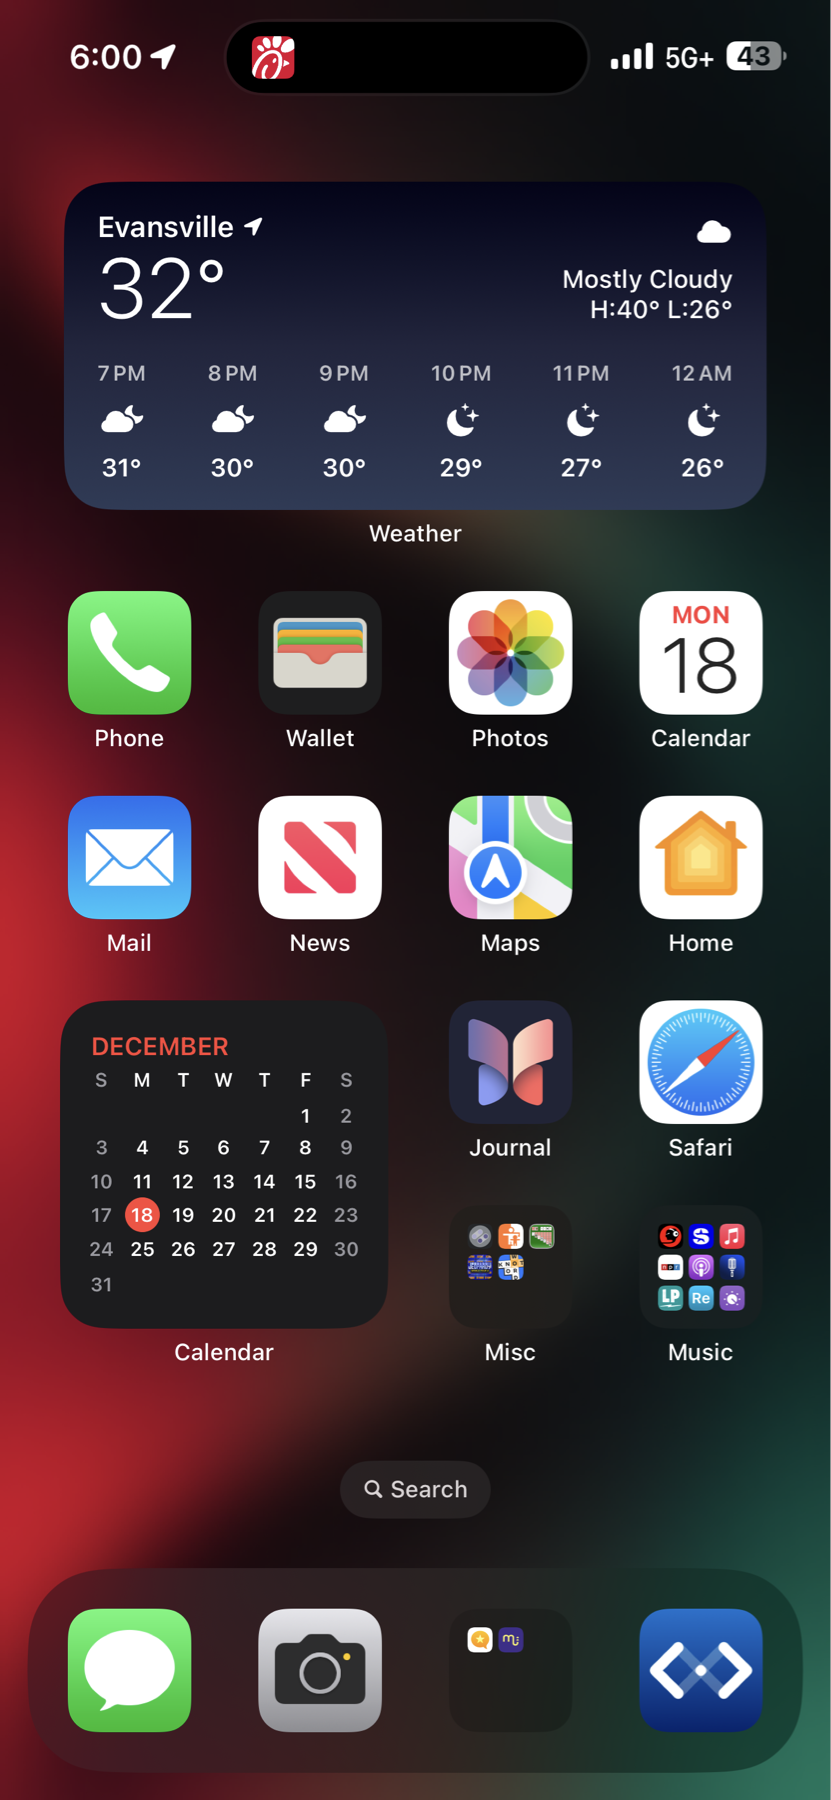 A screenshot of an iPhone home screen displaying various app icons, such as Phone, Wallet, Photos, Calendar, Mail, and Safari, among others. The Weather widget at the top shows the temperature in Evansville as 32°F with a forecast of